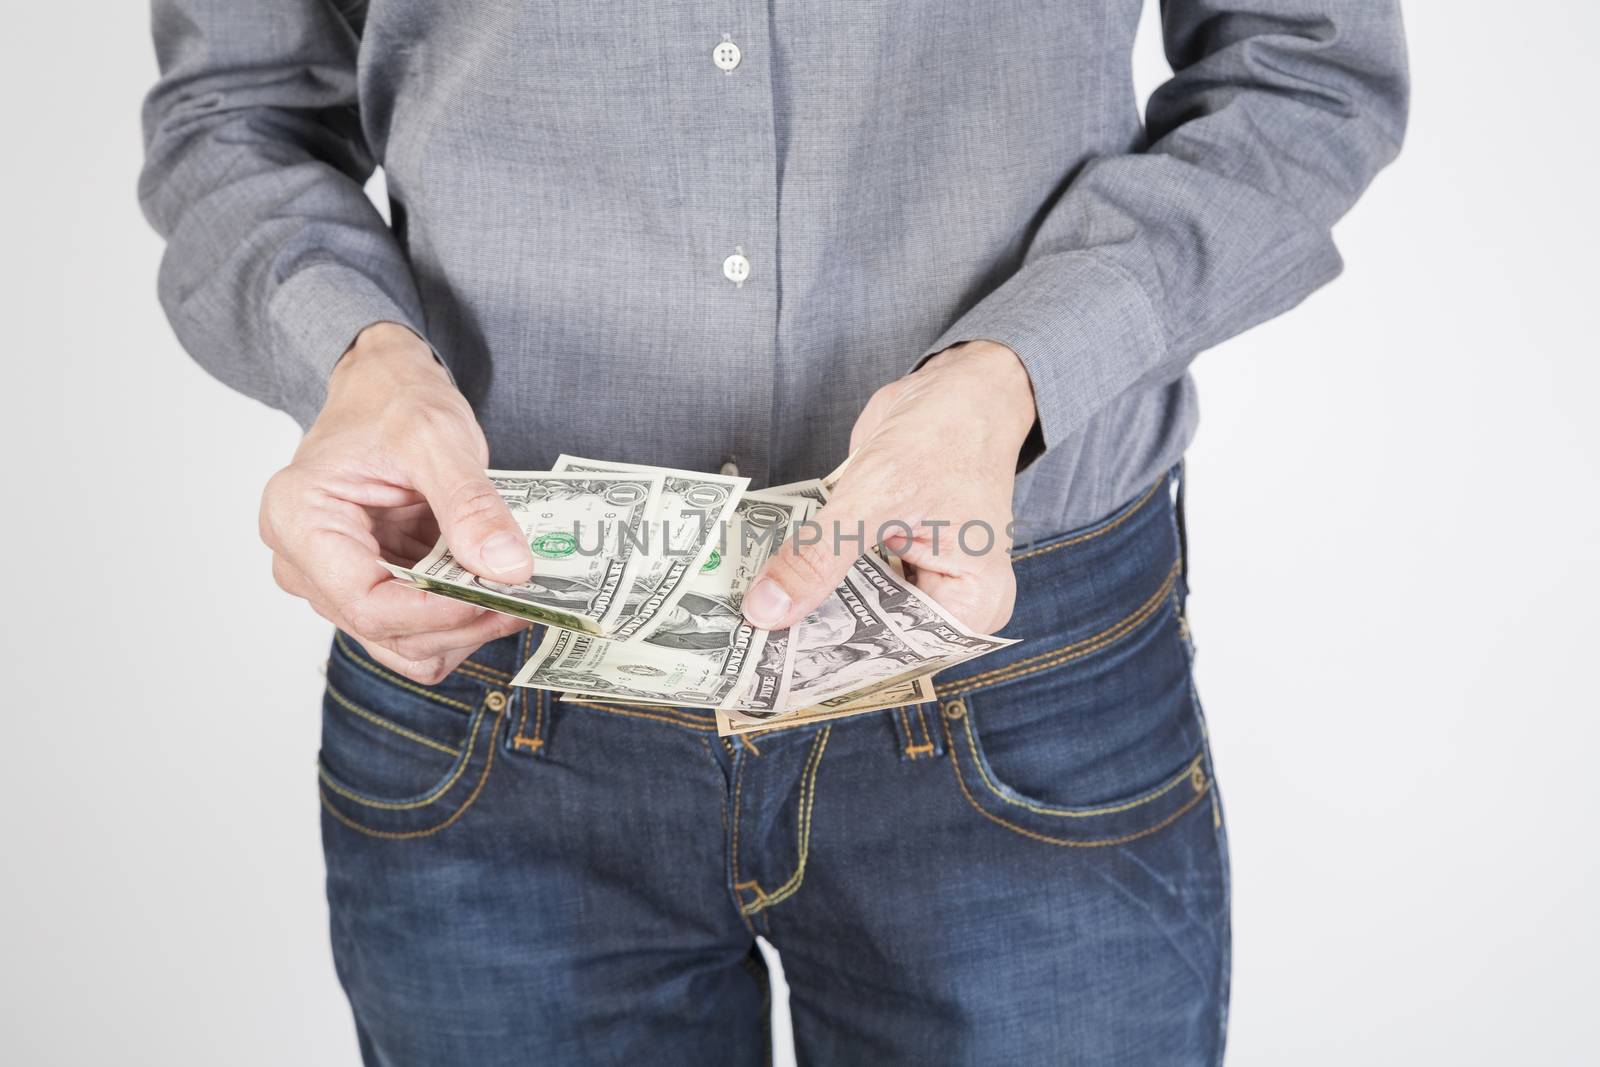 woman blue jeans trousers and grey shirt counting currency money cash one five ten and twenty dollar banknotes in her hands isolated over white background